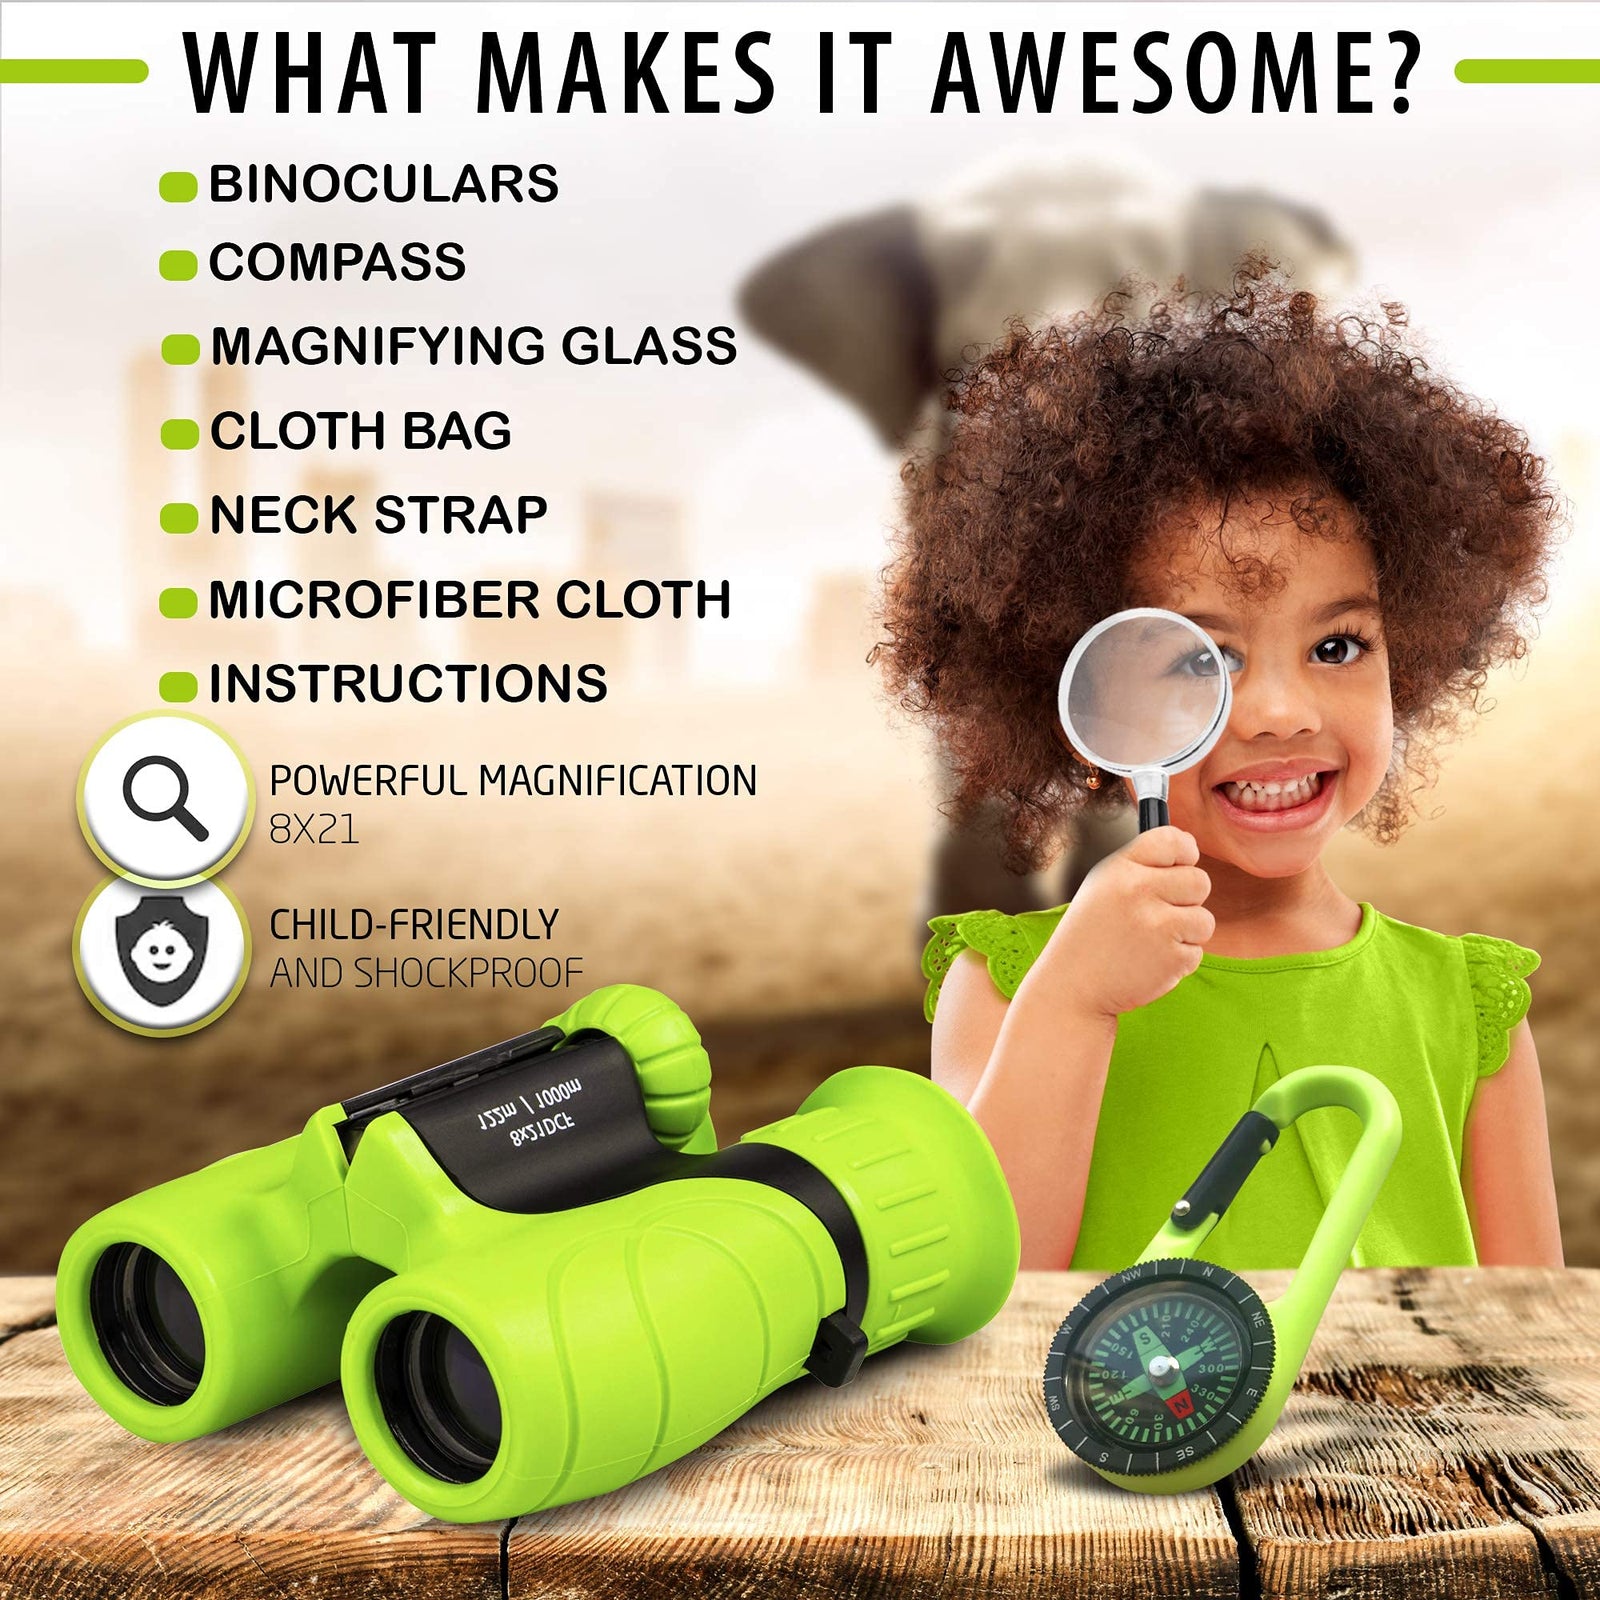 Promora Binoculars for Kids, Camping Set for Kids with Magnifying Glass & Compass (Green) - Toy Gift for 4 to 12 Year Old Boys and Girls